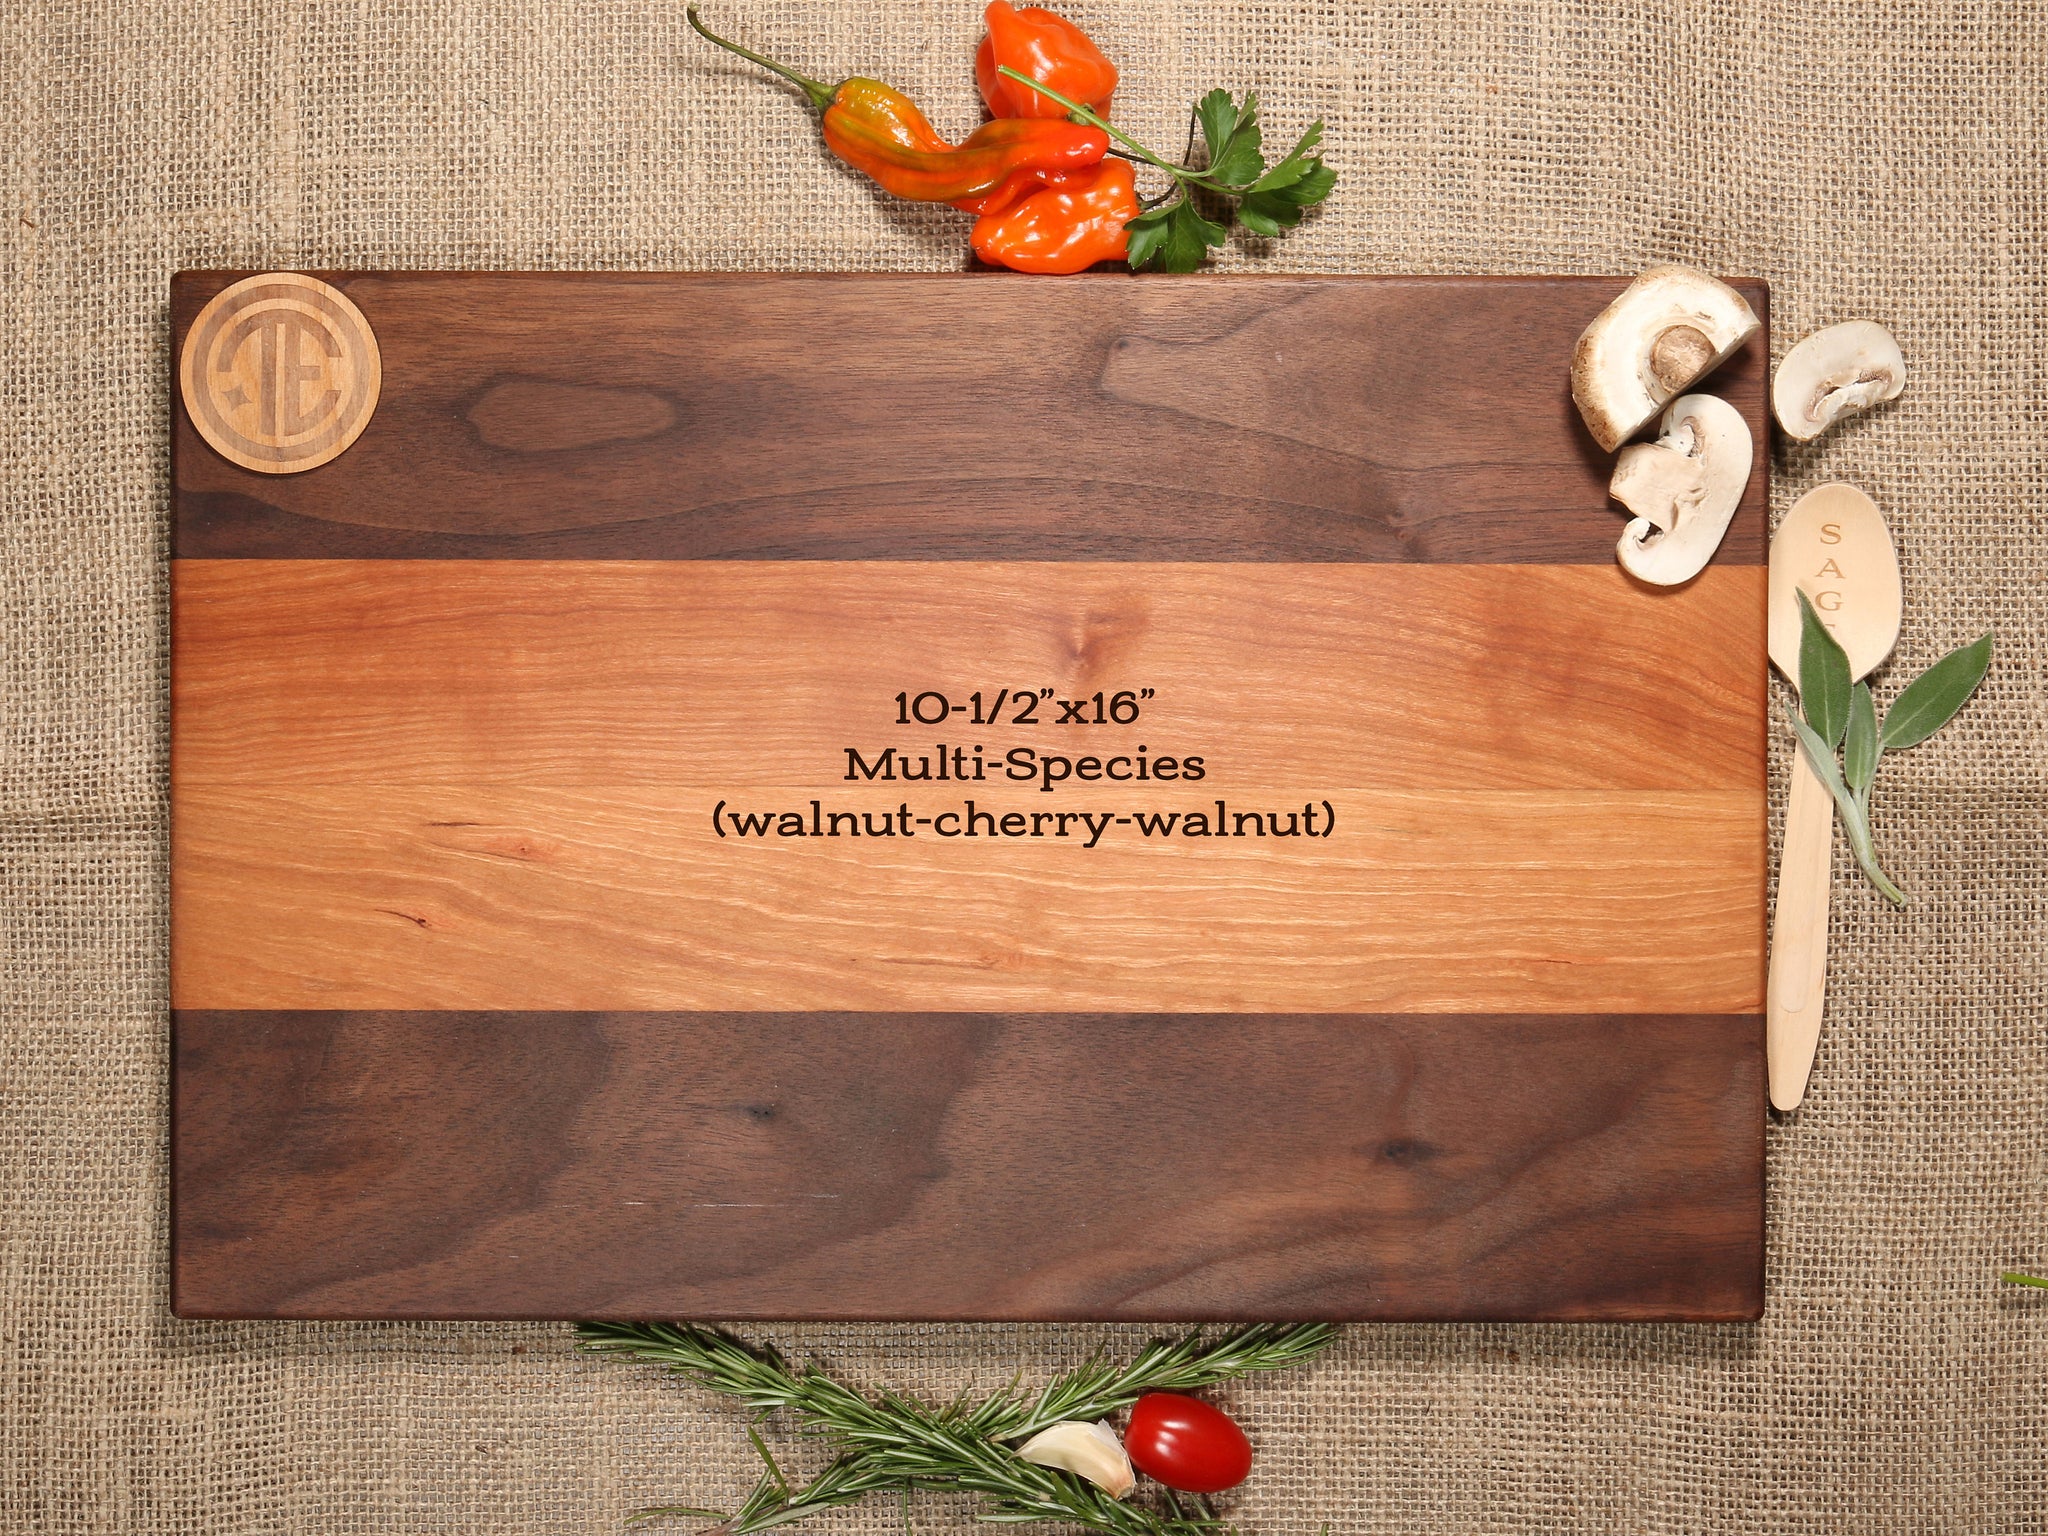 Personalized BBQ Grilling Cutting Board - Gift for Men, Dad Gifts – MAISON  CUSTOM